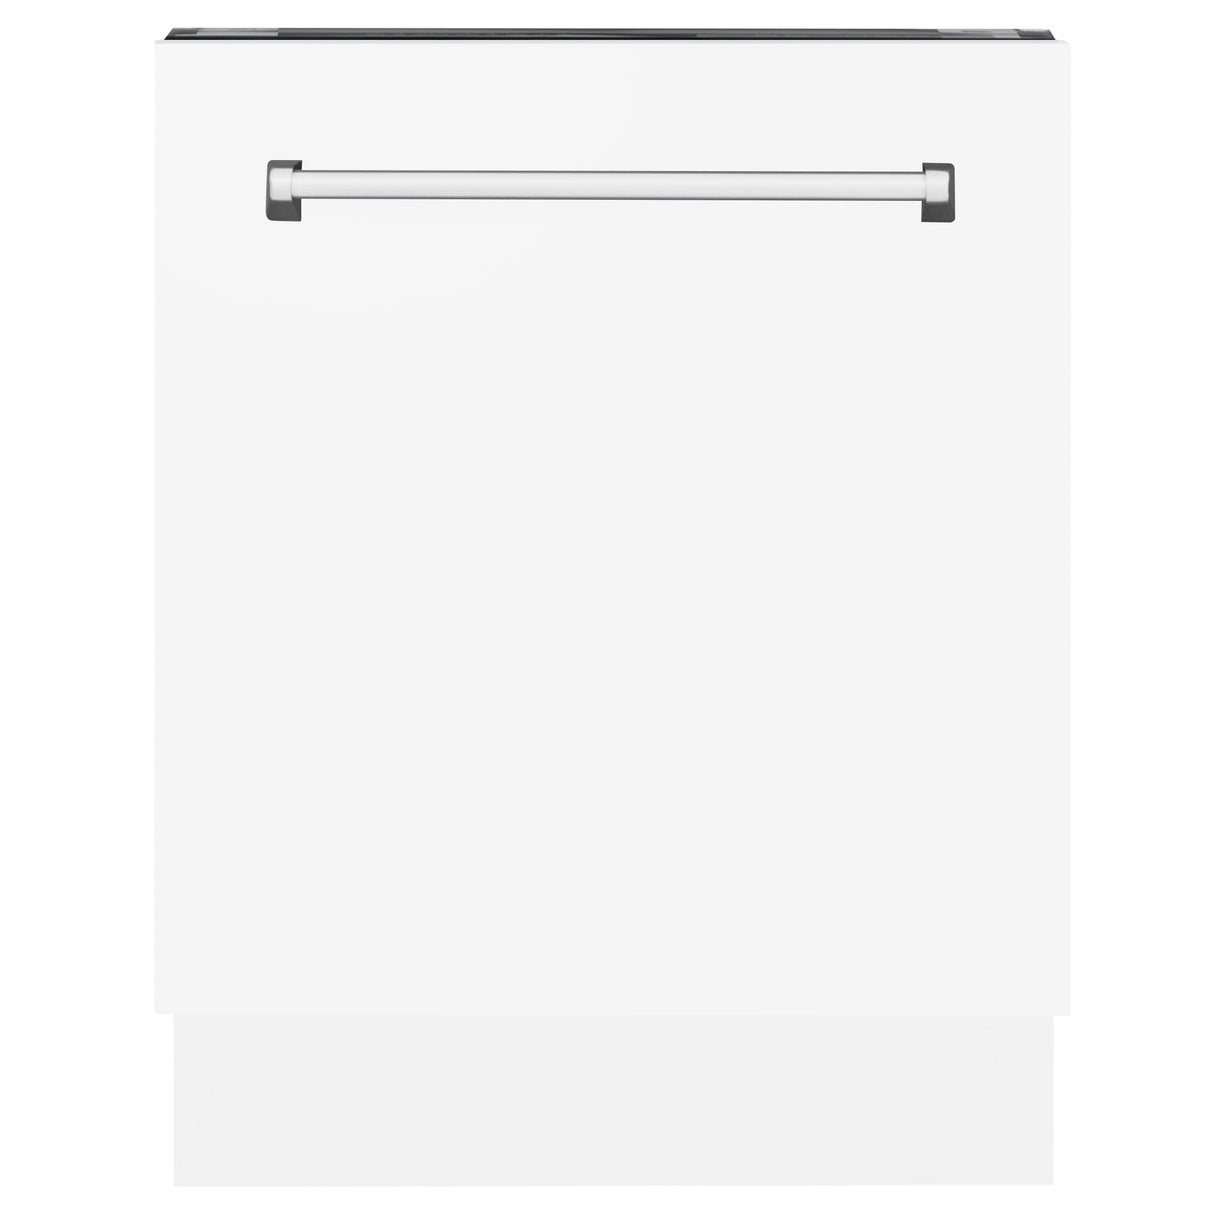 ZLINE 24" Tallac Series 3rd Rack Dishwasher with White Matte Panel and Traditional Handle, 51dBa (DWV-WM-24)